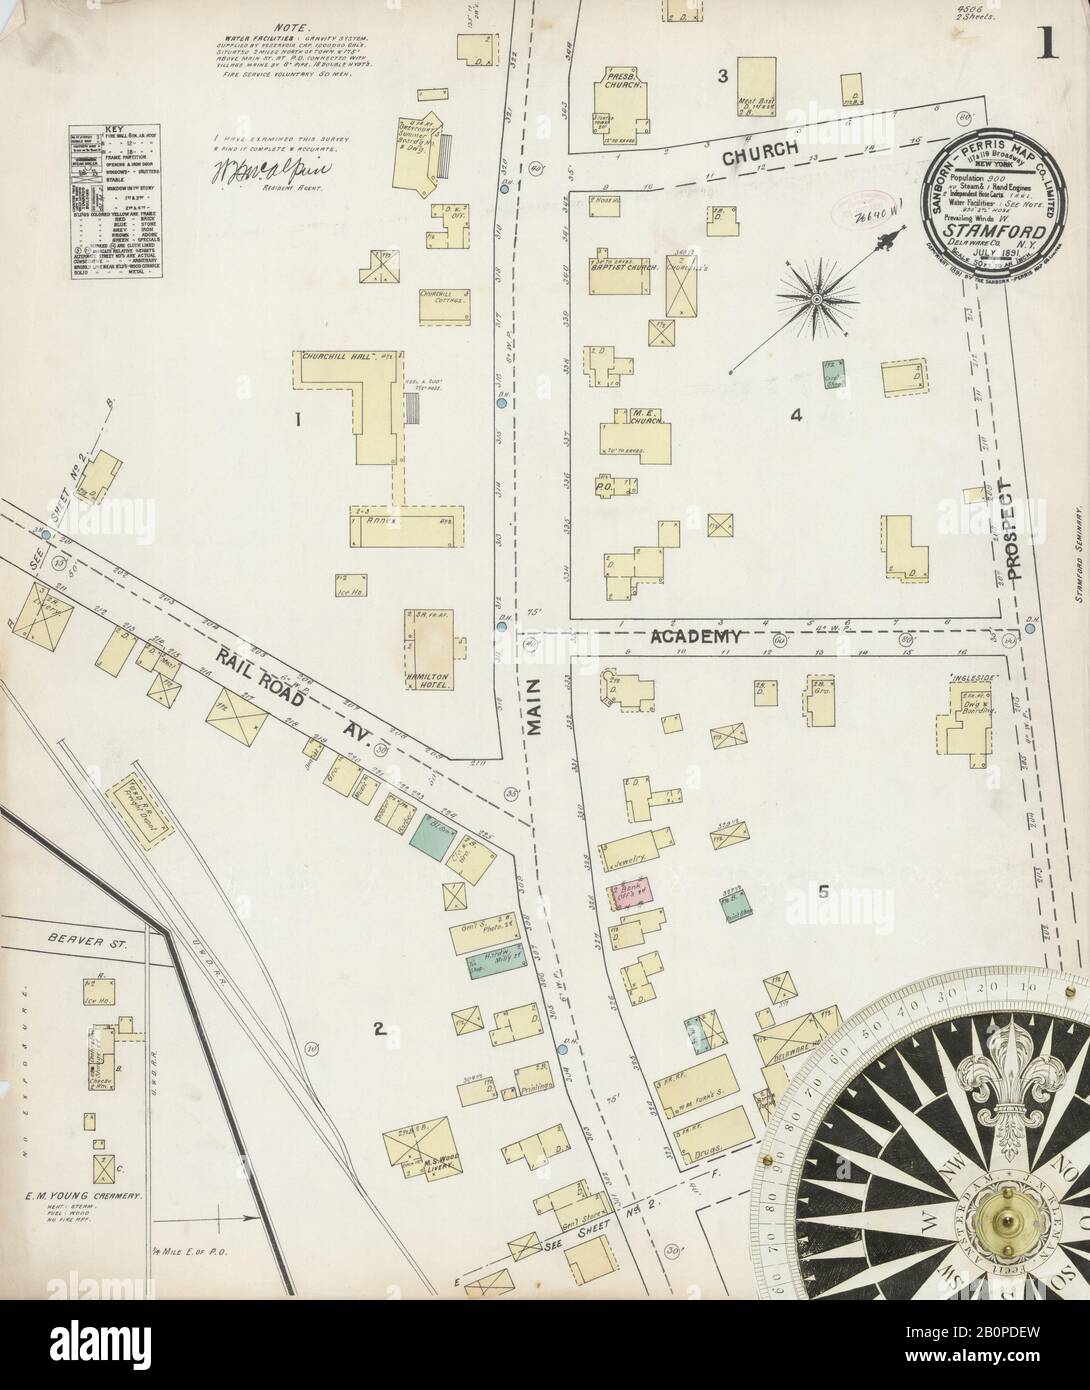 Image 1 of Sanborn Fire Insurance Map from Stamford, Delaware County, New York. Jul 1891. 2 Sheet(s), America, street map with a Nineteenth Century compass Stock Photo